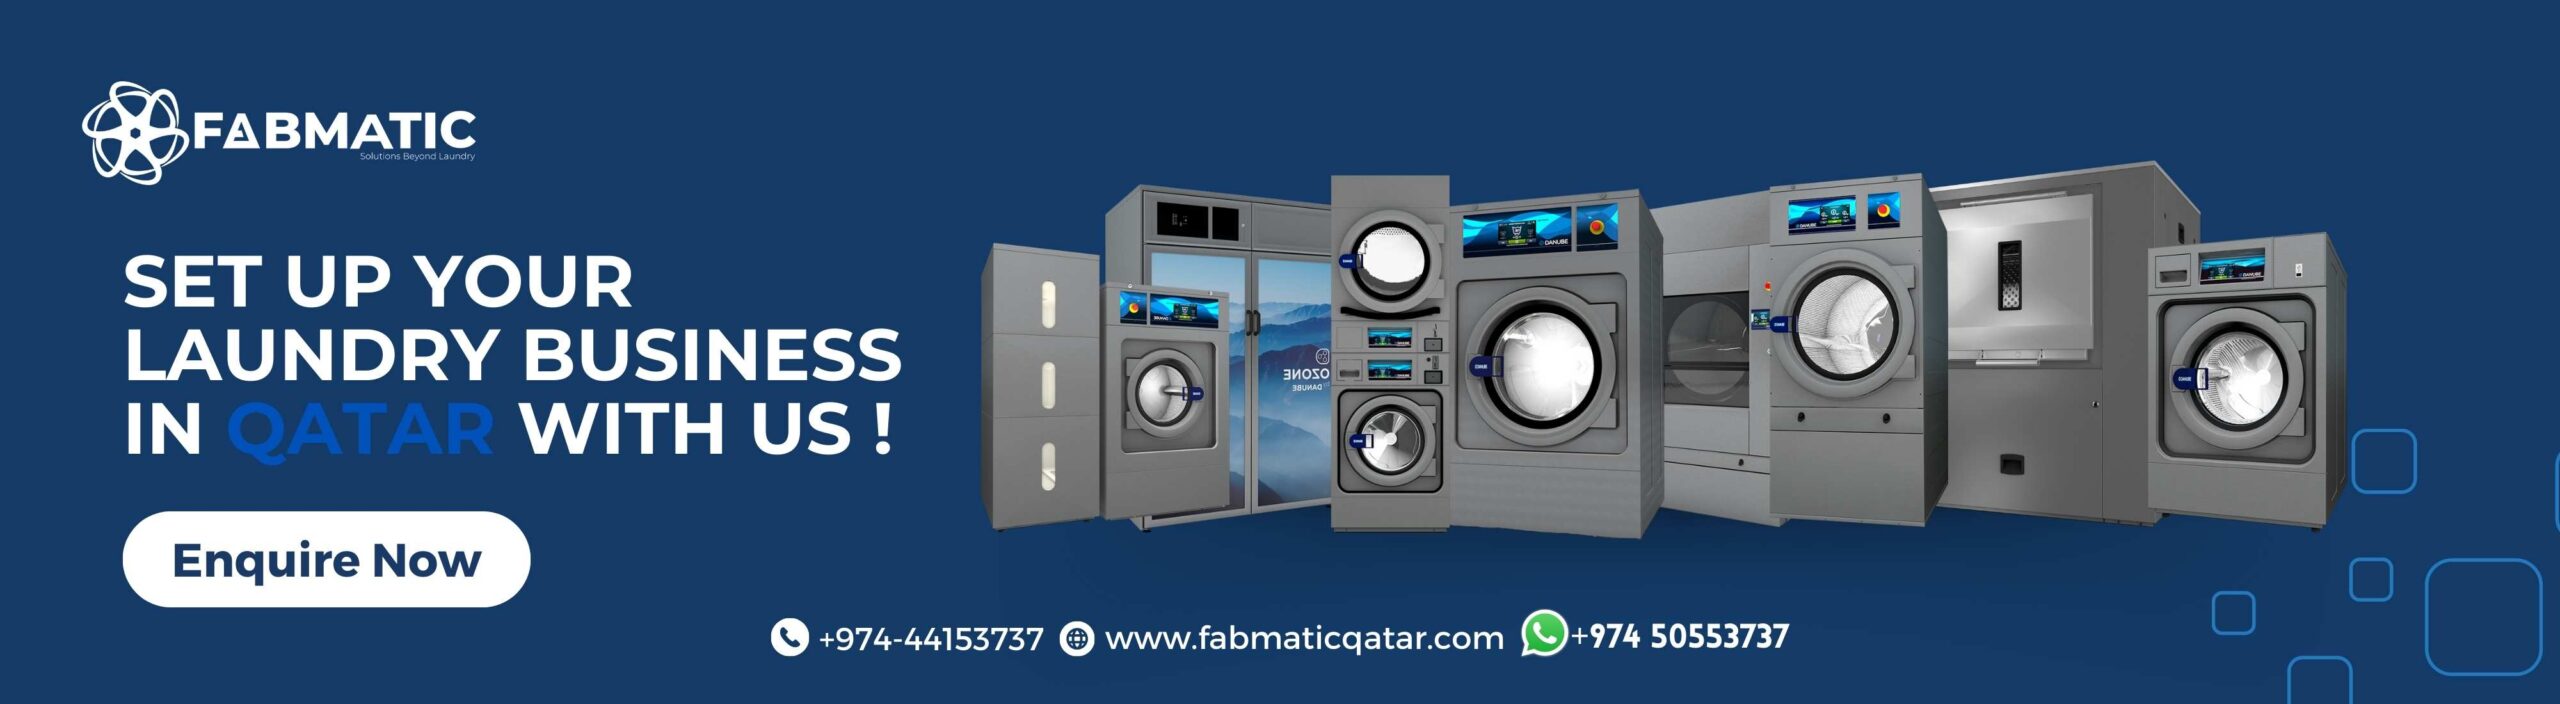 Set up your laundry business in qatar with us !